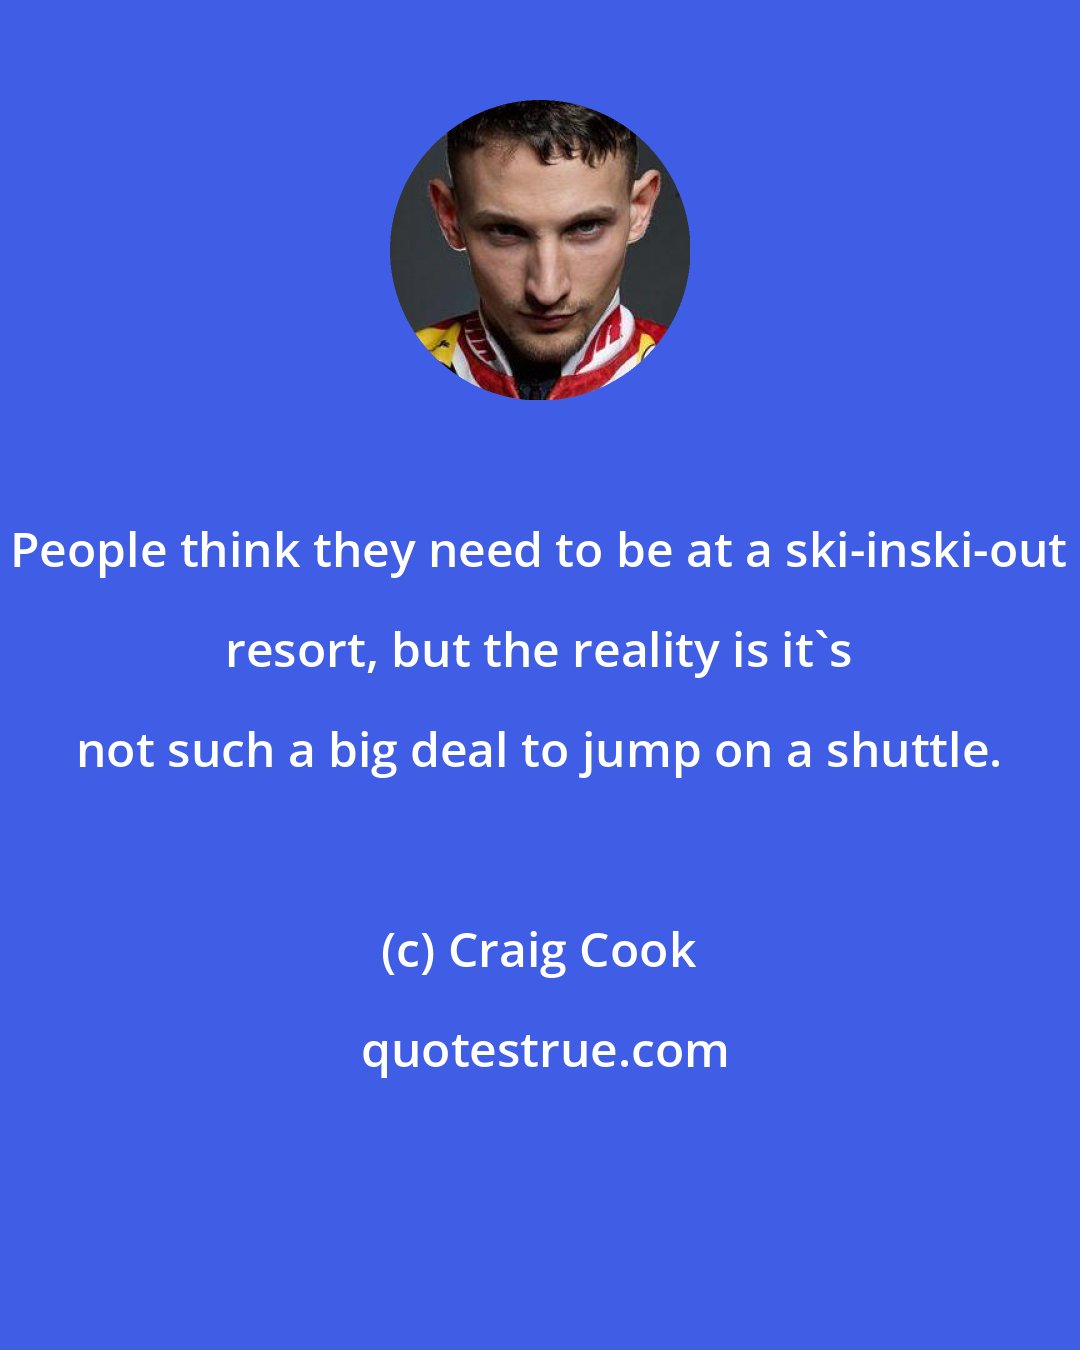 Craig Cook: People think they need to be at a ski-inski-out resort, but the reality is it's not such a big deal to jump on a shuttle.